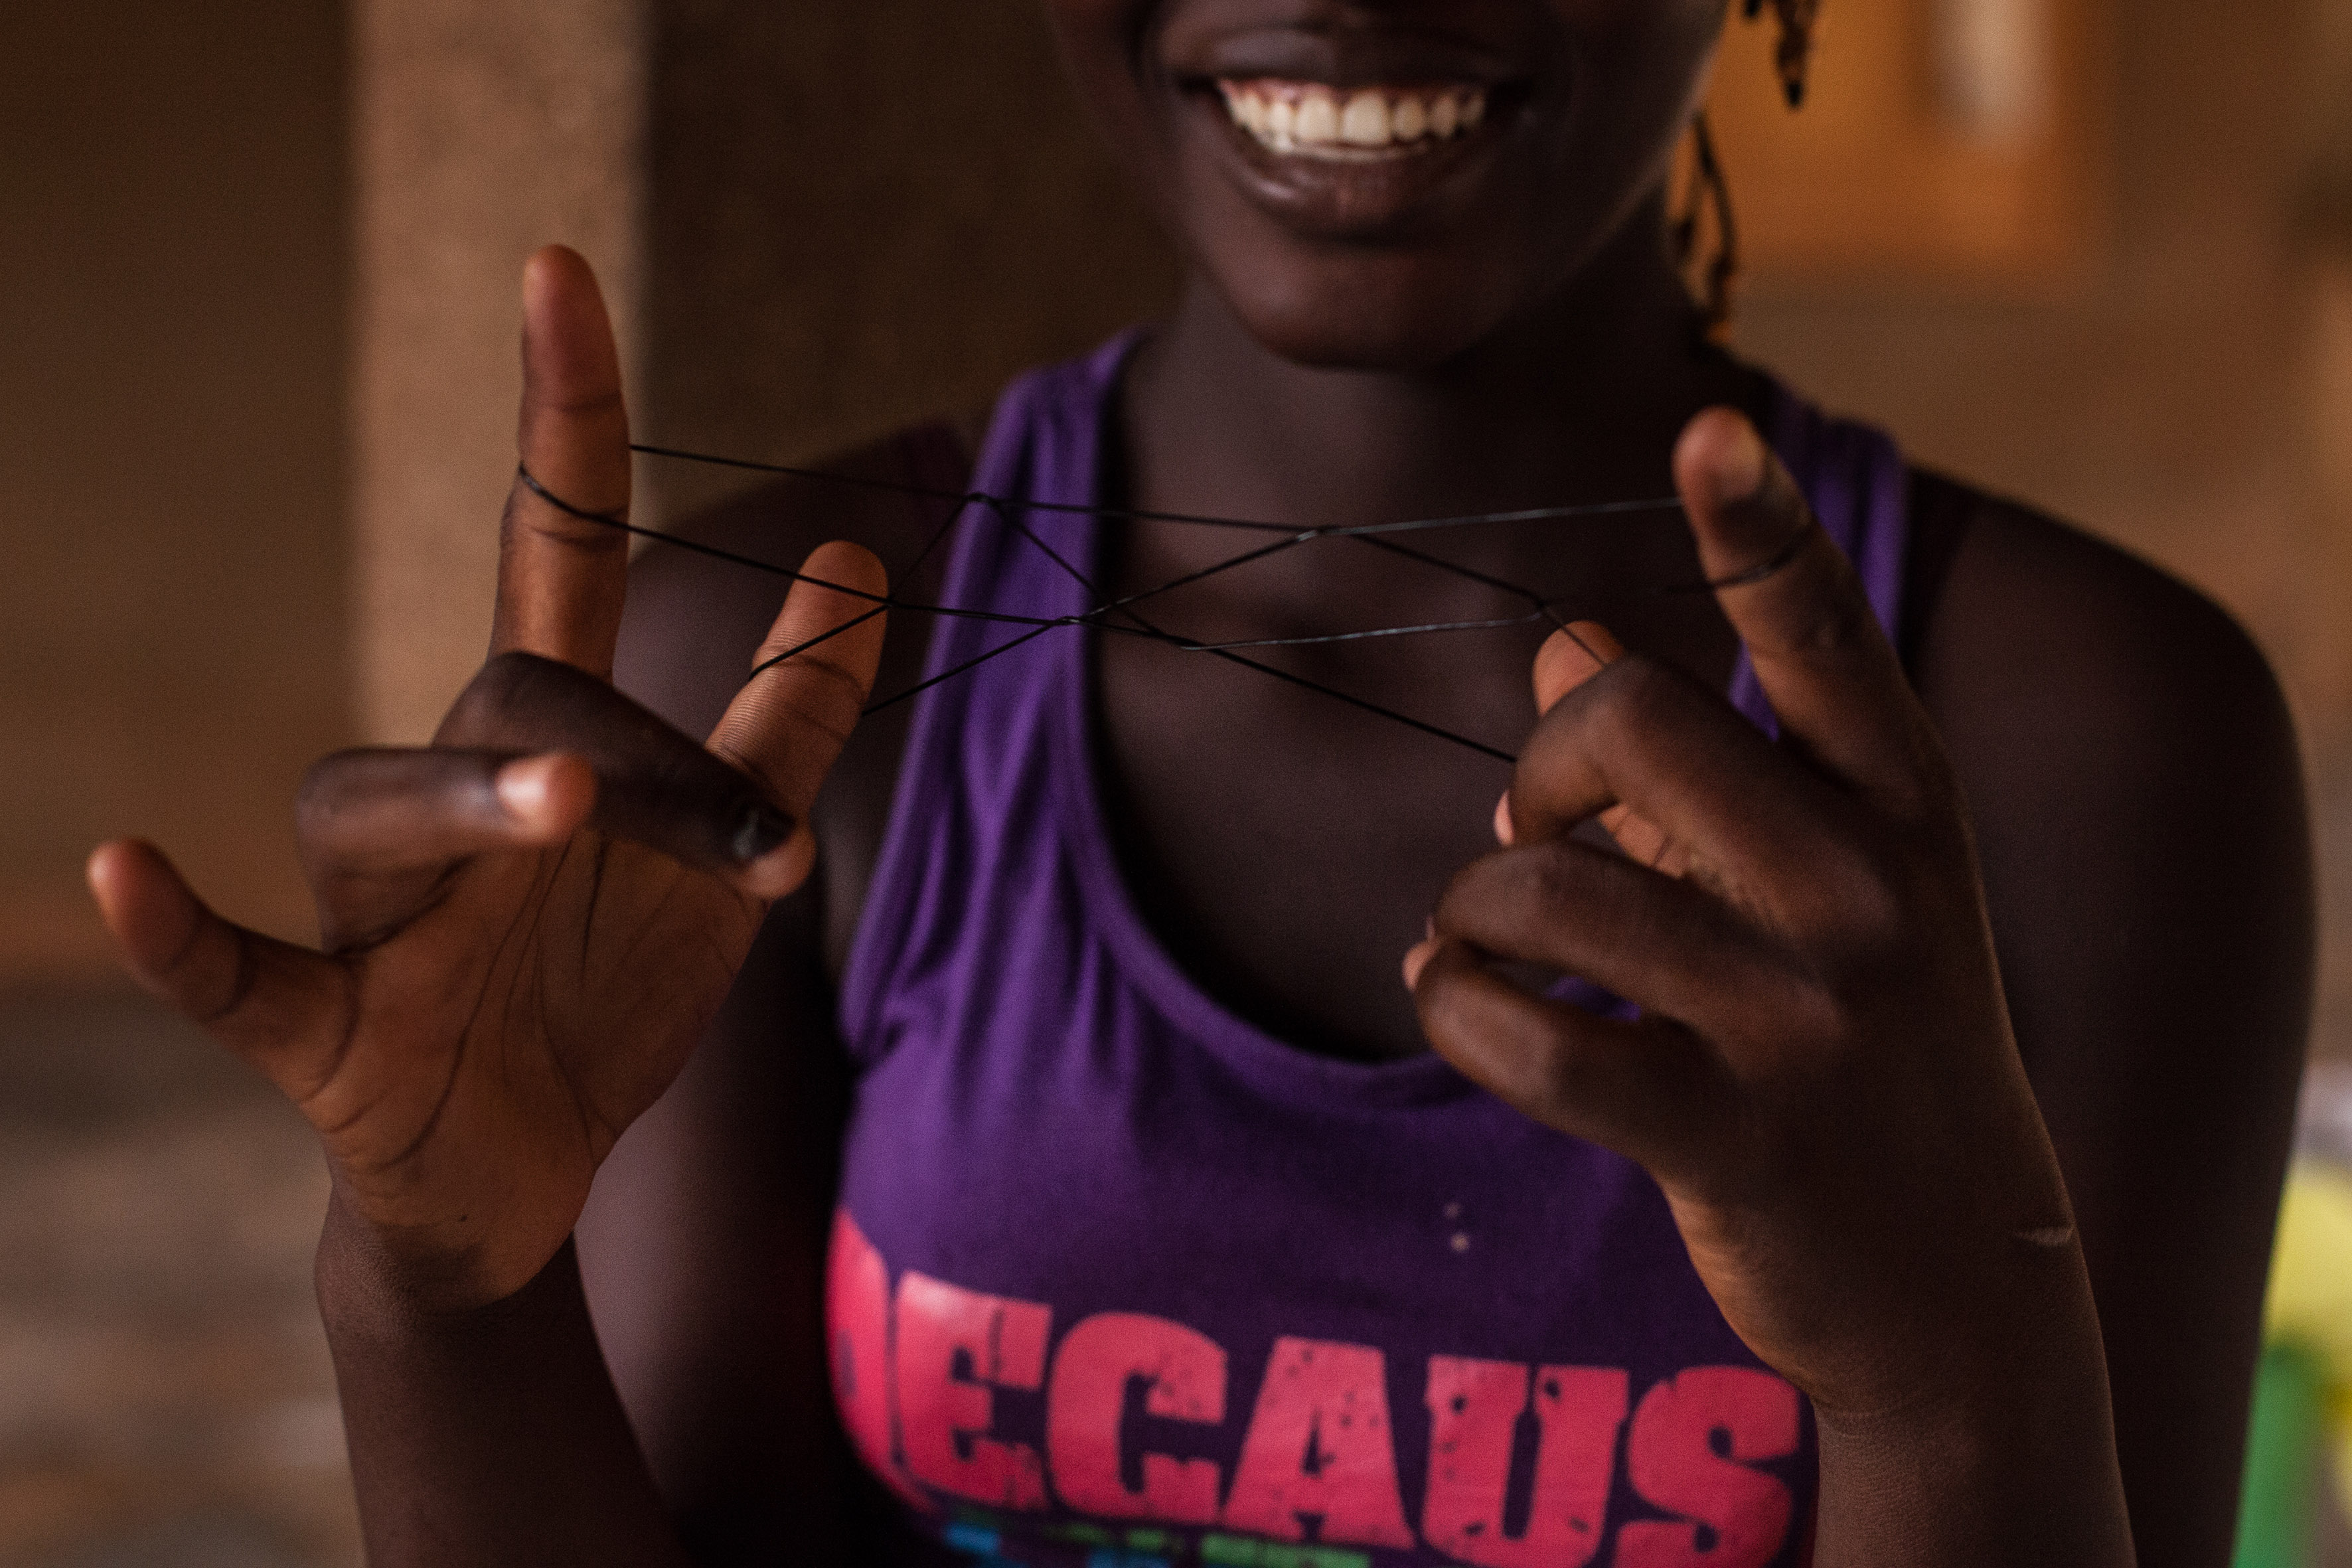 Playing with elastic bands – a typical game played by girls aged 7 to 12 in Burkina Faso. Girls relax and reconnect with their childhoods at Foceb shelter for survivors of rape, early and forced marriage and unwanted pregnancy in central Ouagadougou, capital of Burkina Faso. The shelter takes in girls aged as young as 12 to as old as 18. Between 2001 and 2009, the shelter accommodated a total of 209 girls and 168 children. In Burkina Faso, girls who get pregnant outside marriage are often rejected by their families. Places like Foceb give them the opportunity to rebuild their lives. In Burkina Faso, 52% of all girls are forced into marriage – the 7th highest rate for child marriage in the world.